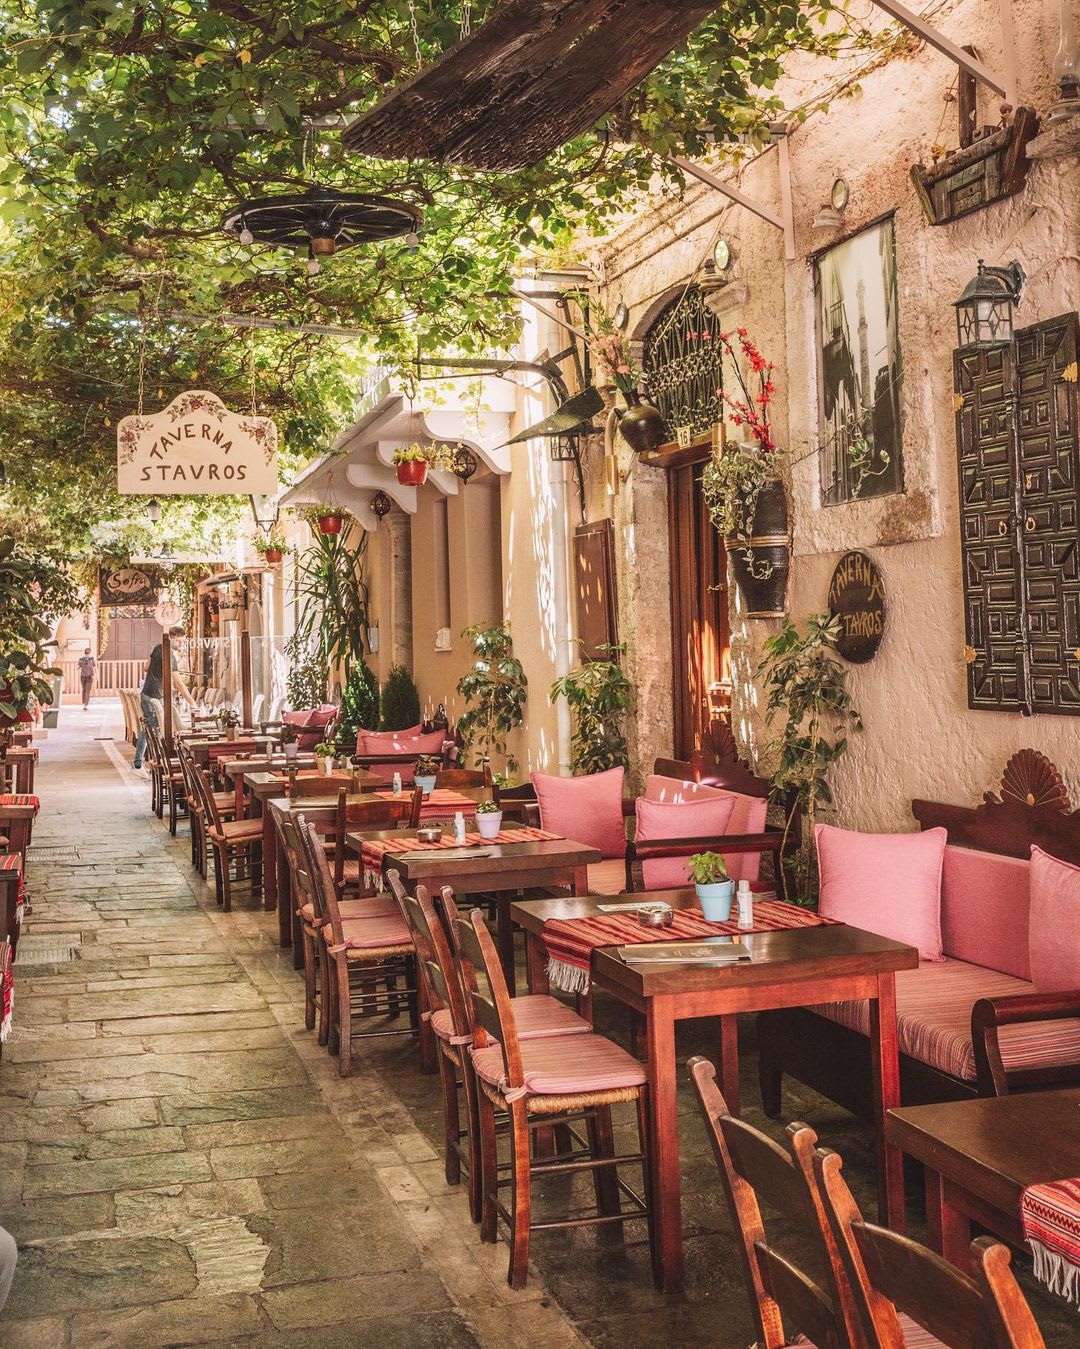 Outdoor dining under a shade in a narrow alley of Rethymno, a small historic city on the island of Crete, Greece.